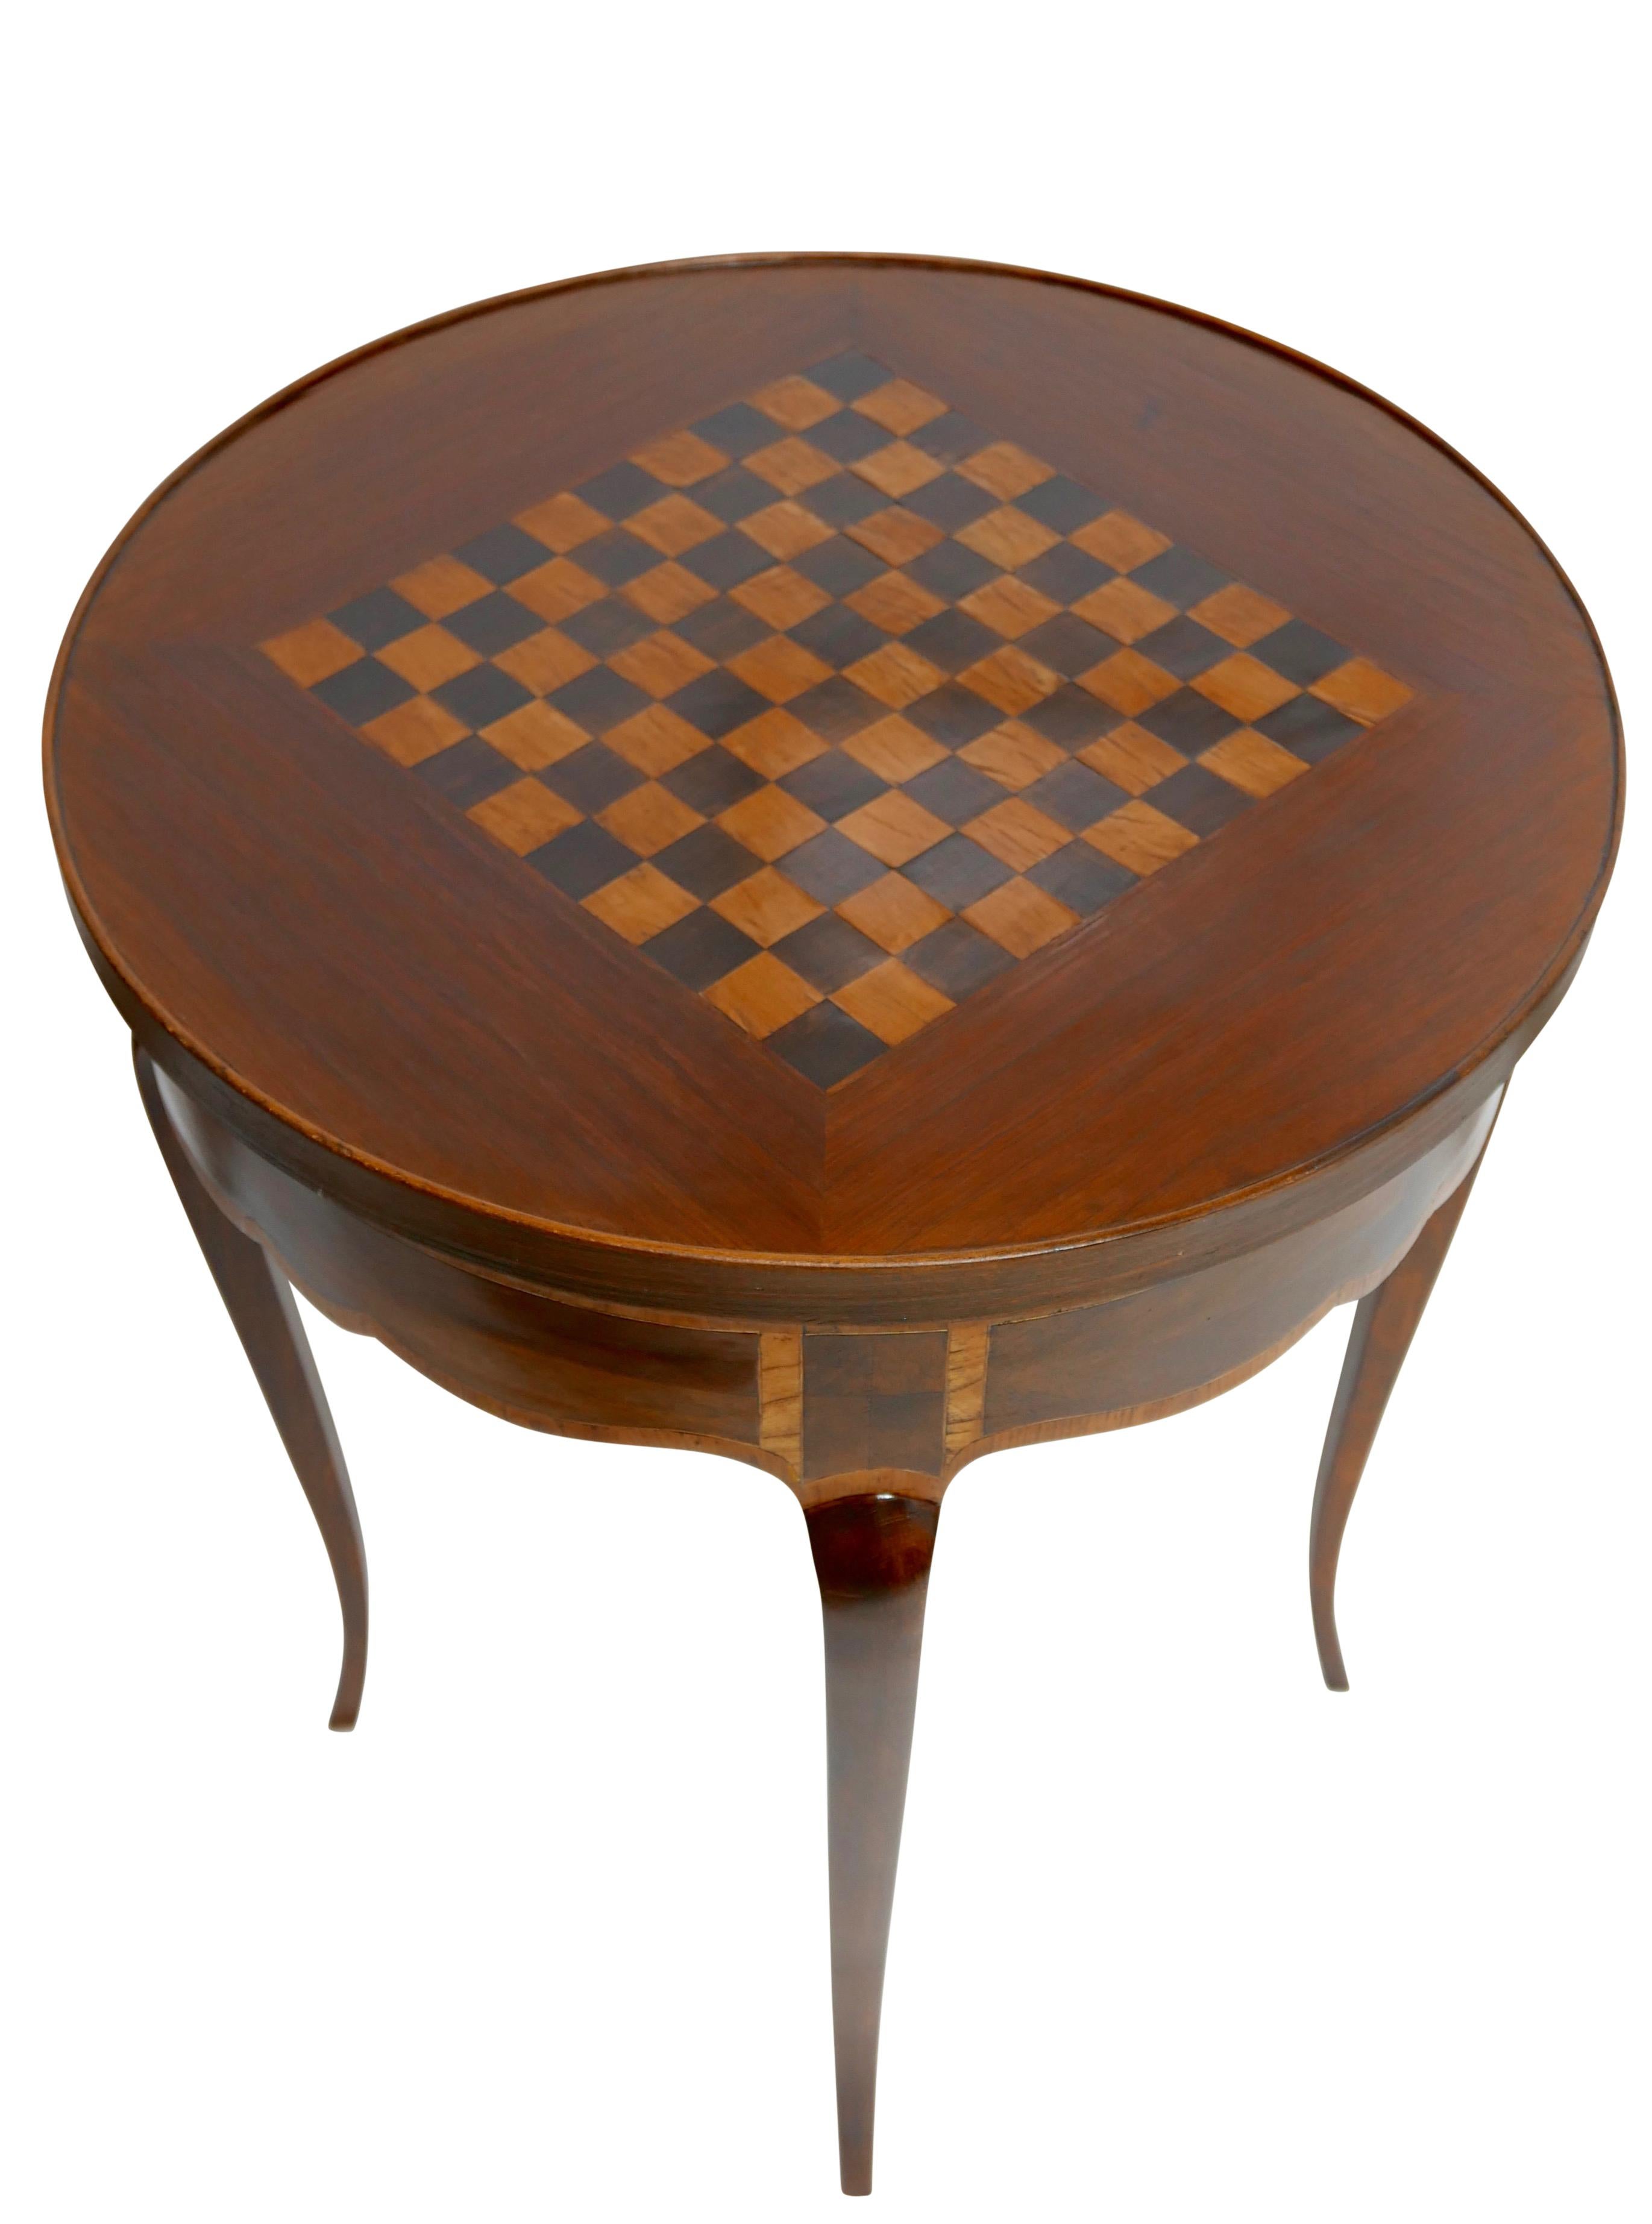 Walnut Circular Tric Trac Game Table with Fruitwood Inlay, Mid-19th Century 3